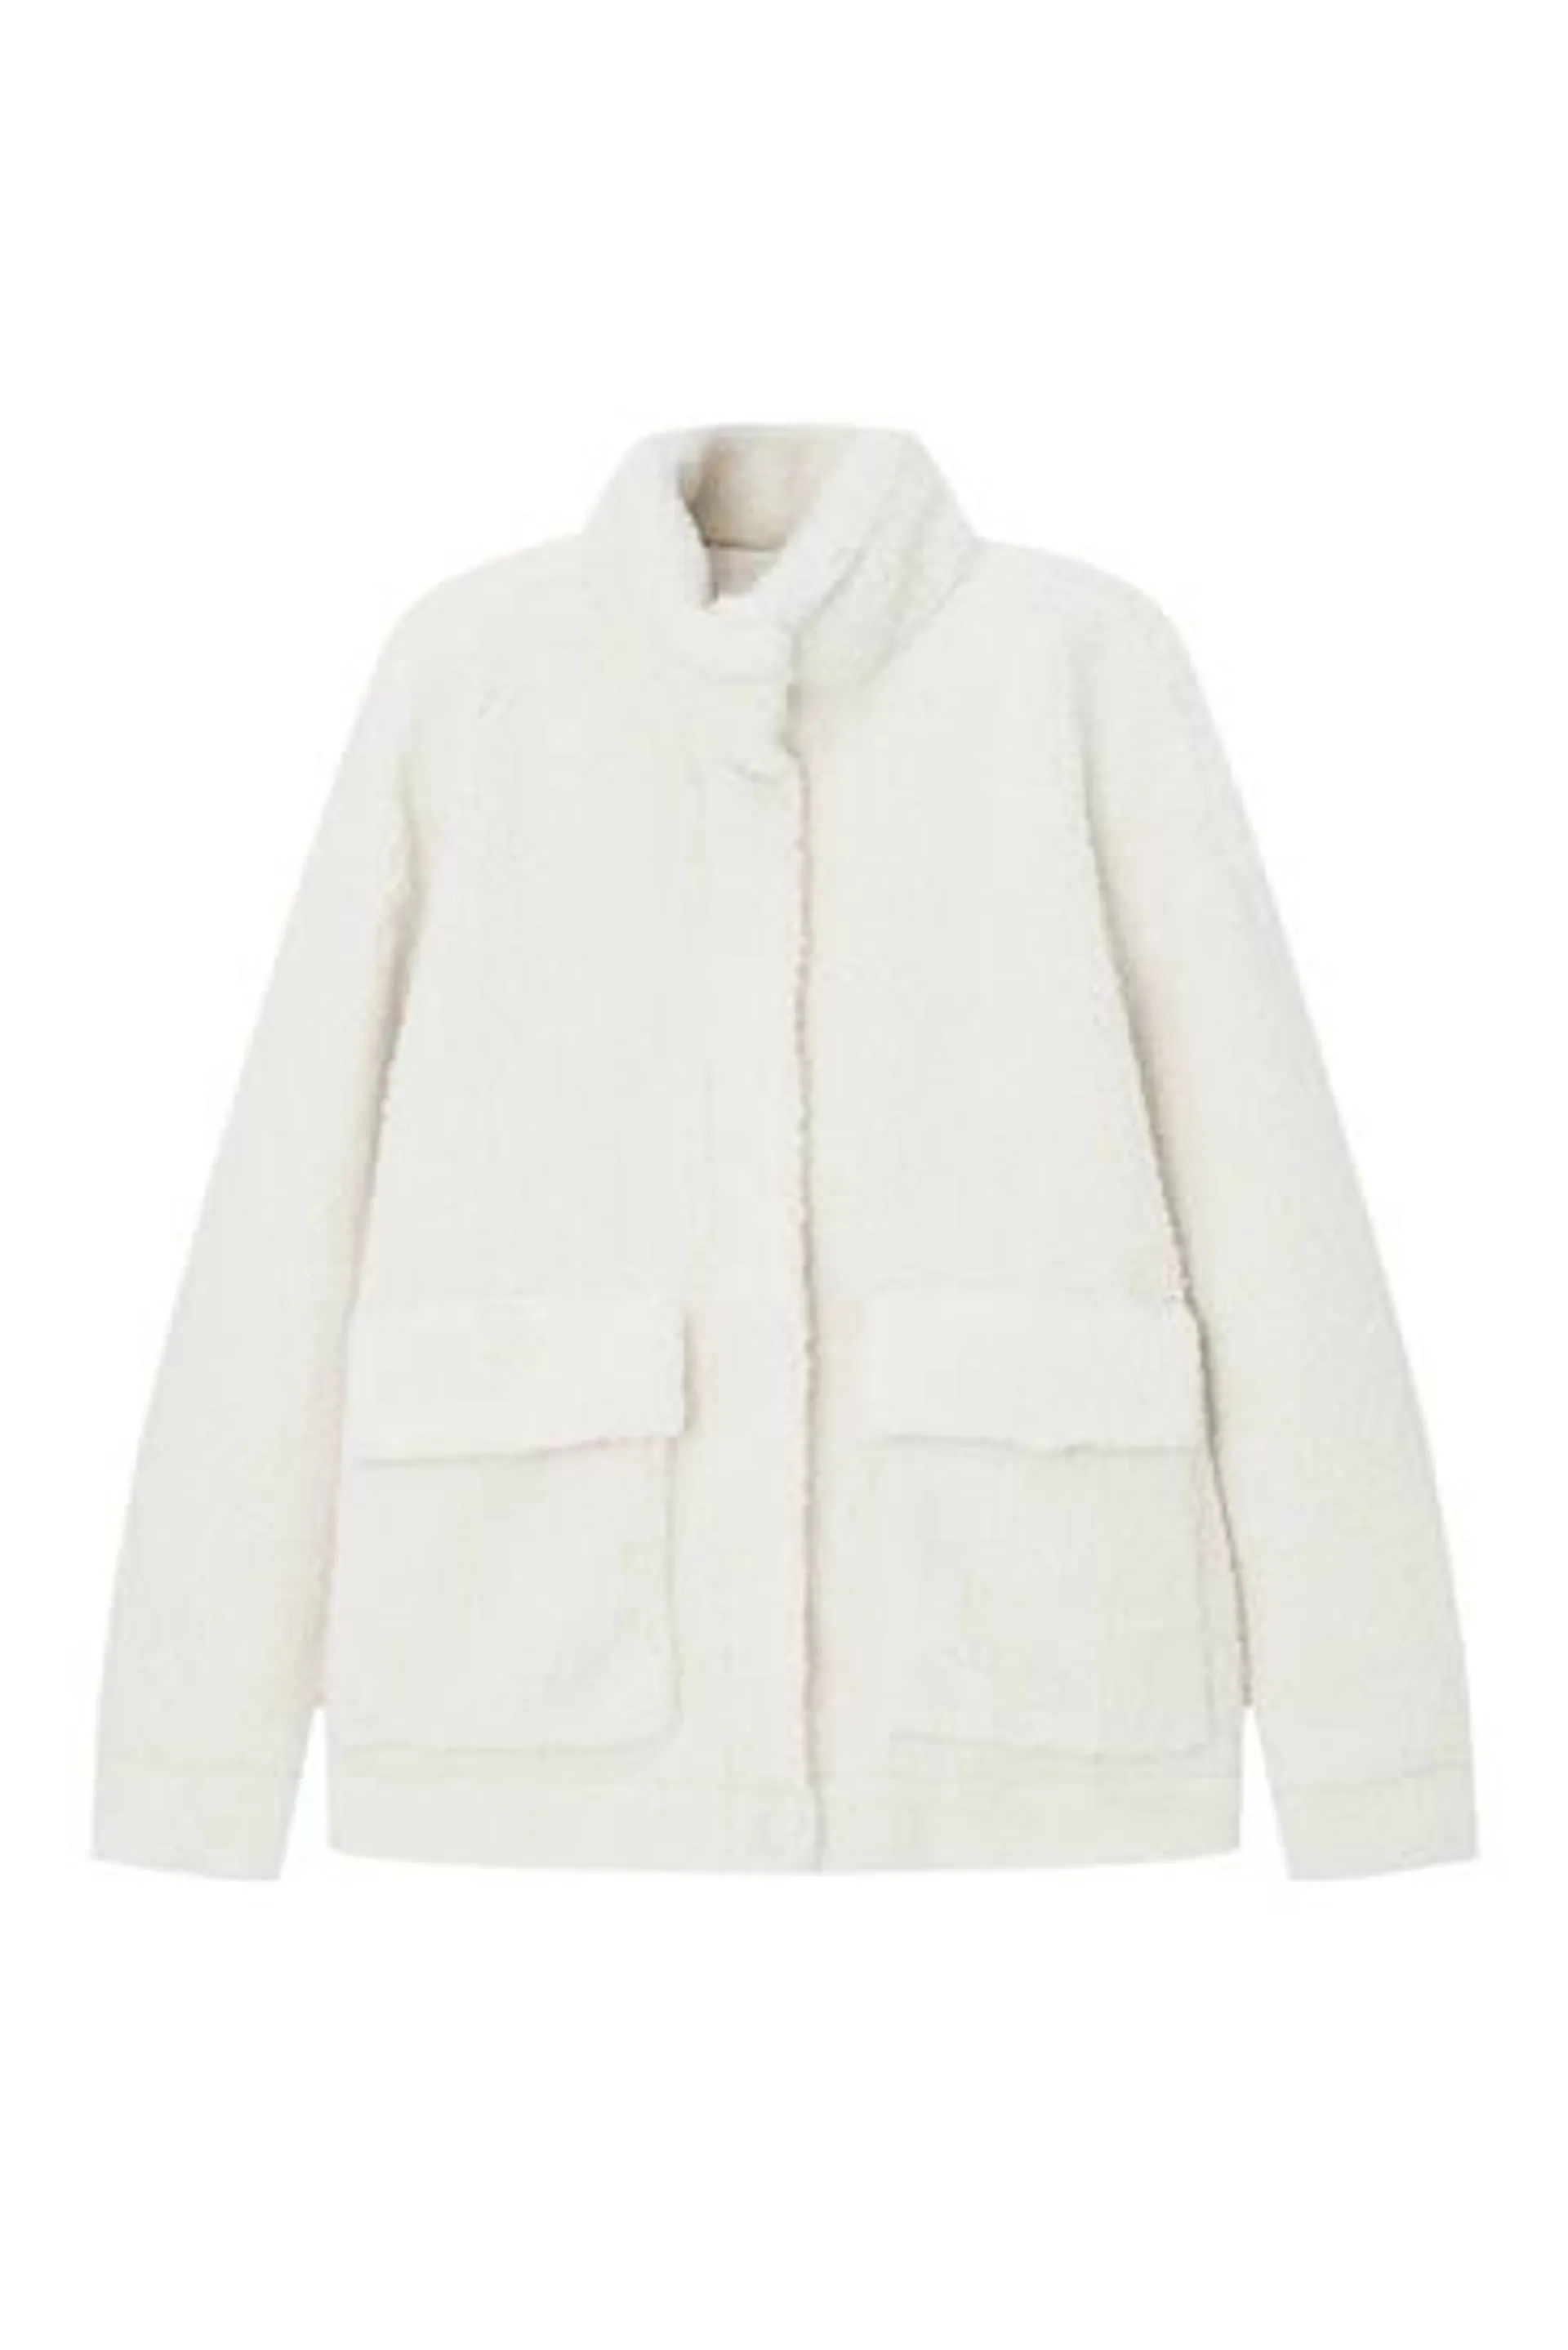 Faux shearling jacket with pockets